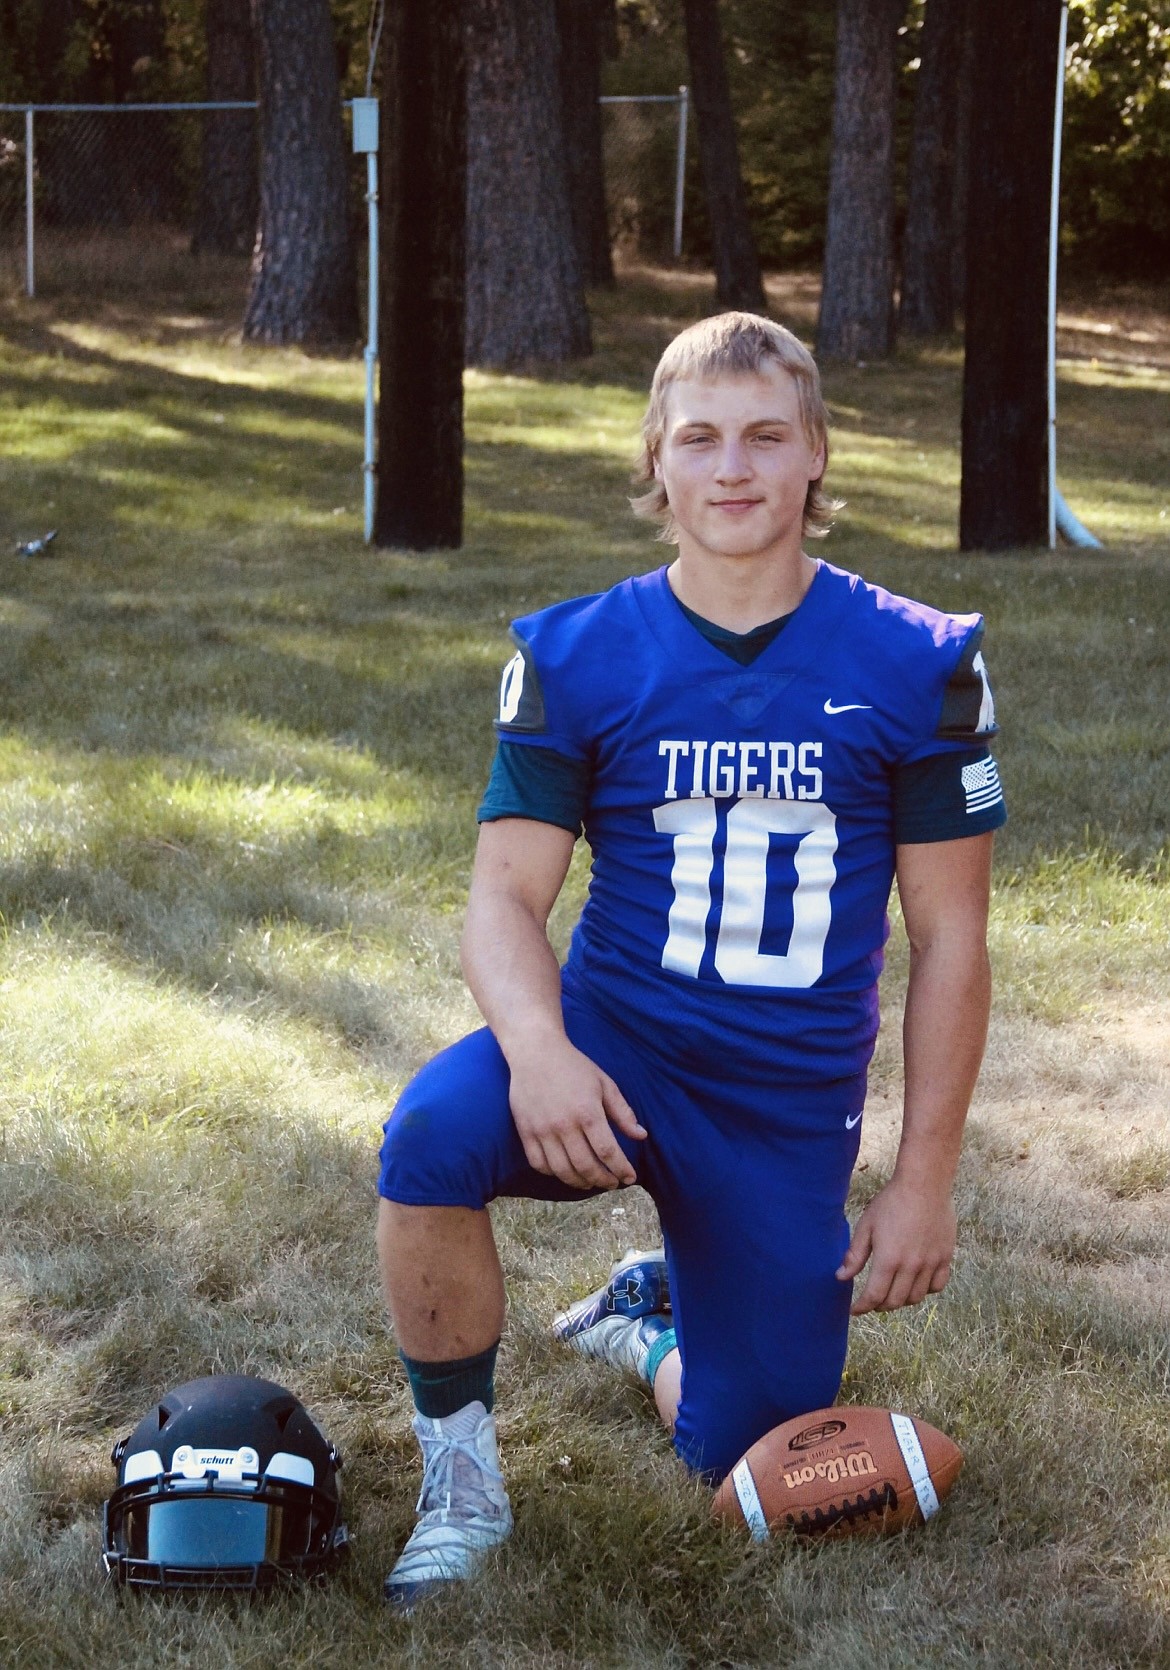 Mullan football player Luke Trogden was recently named one of Idaho's top 10 defensive linemen by Idahosports.com.